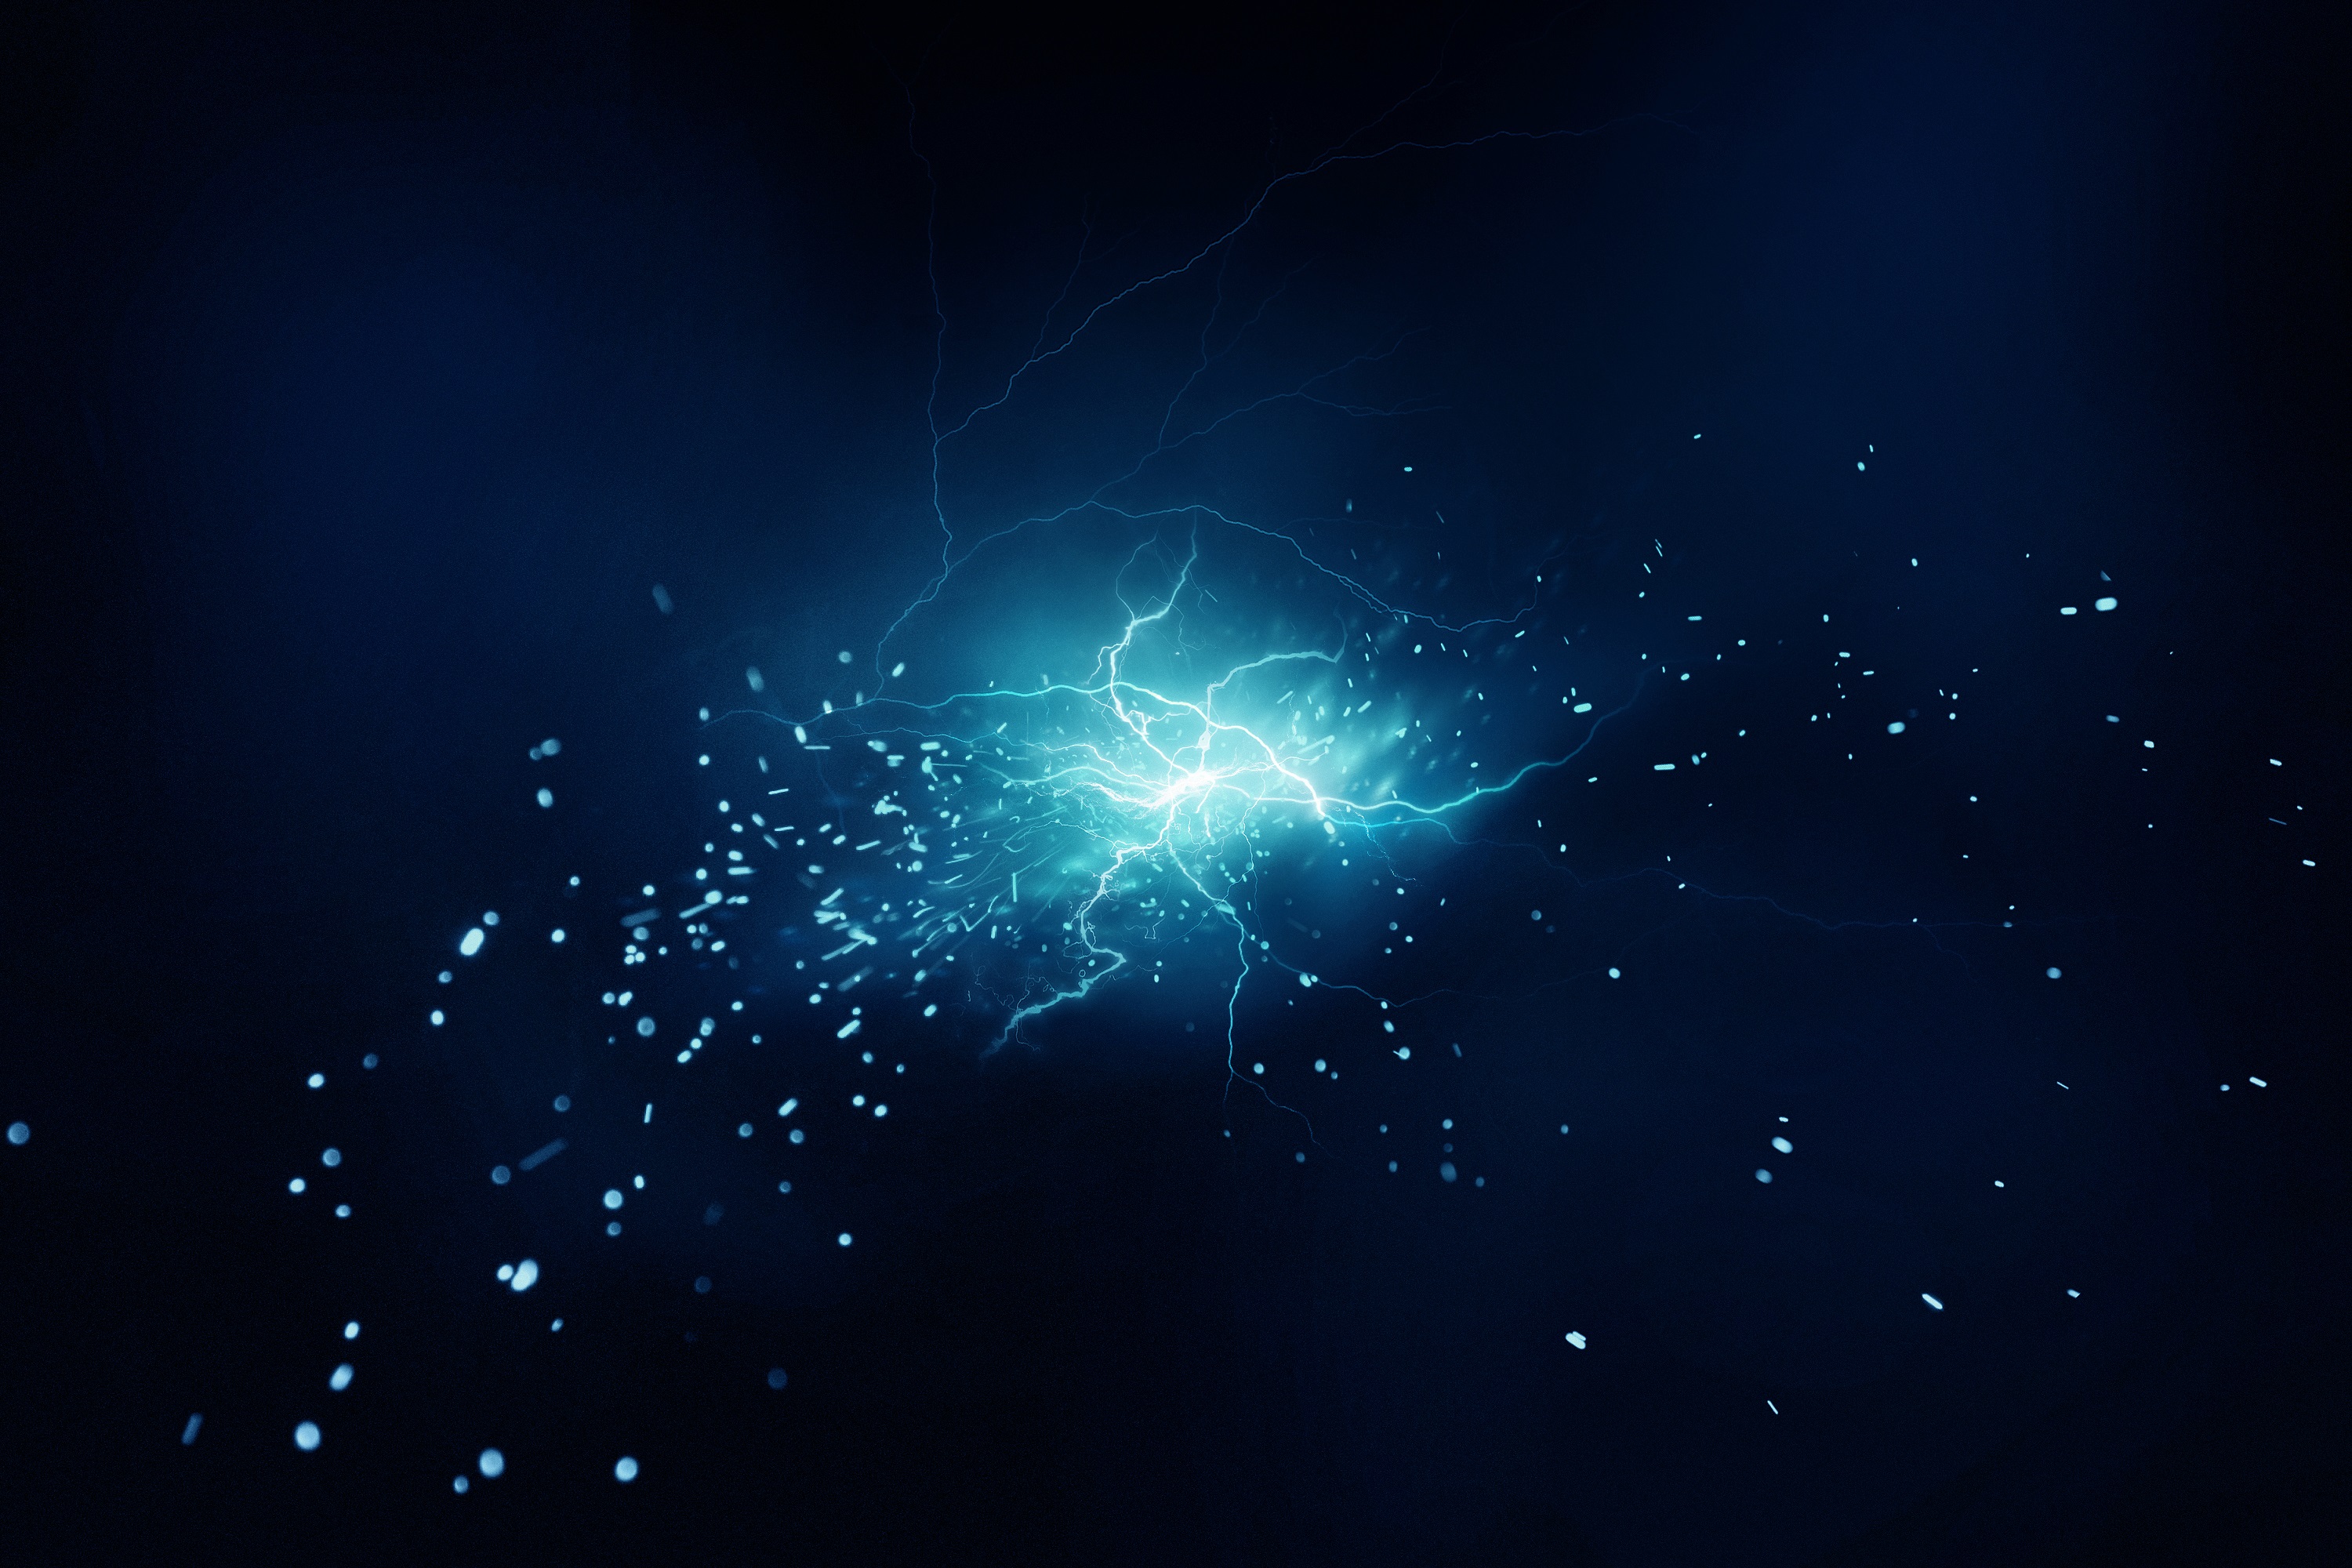 Lights Blue Dark Lightning Spark Particle Floating Particles Electricity Electronic Abstract Industr 3000x2000